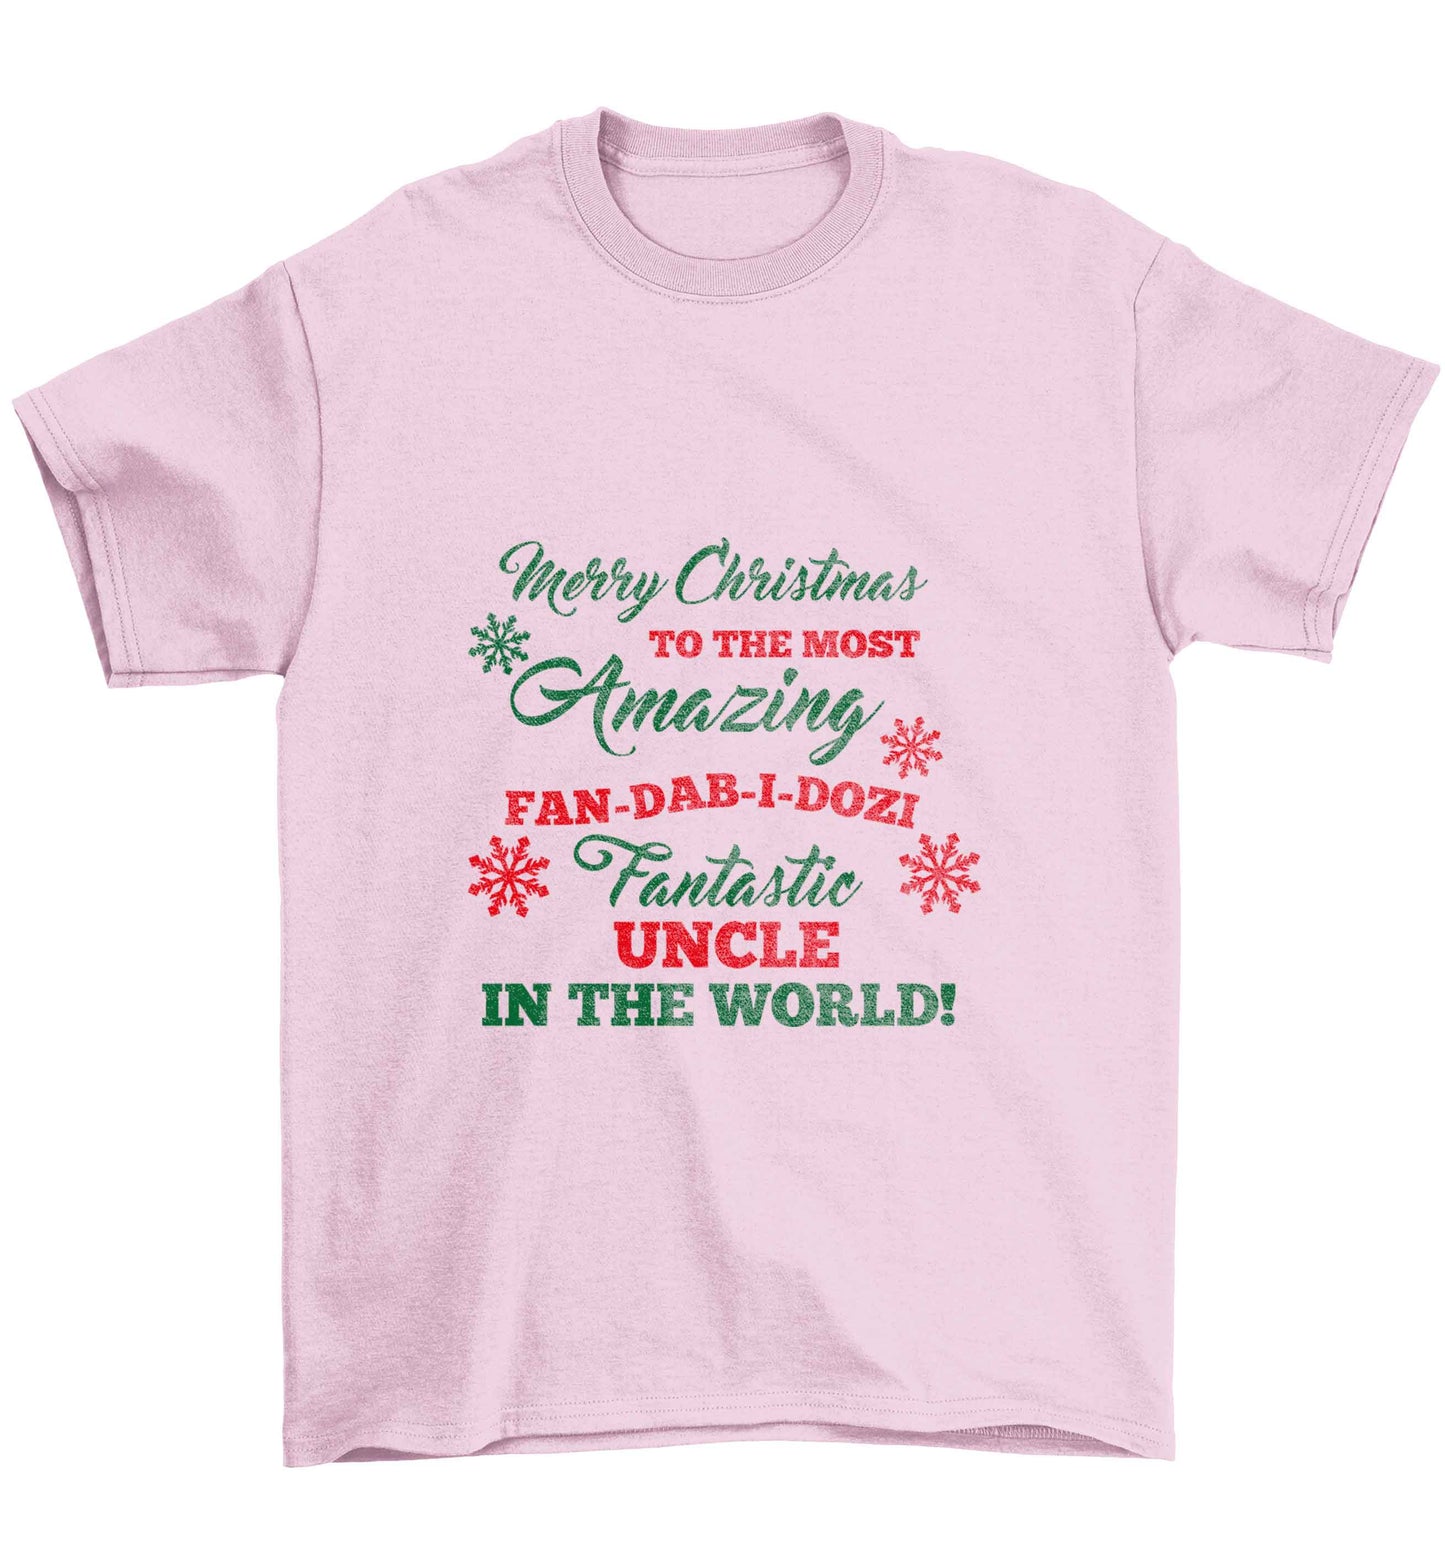 Merry Christmas to the most amazing fan-dab-i-dozi fantasic Uncle in the world Children's light pink Tshirt 12-13 Years